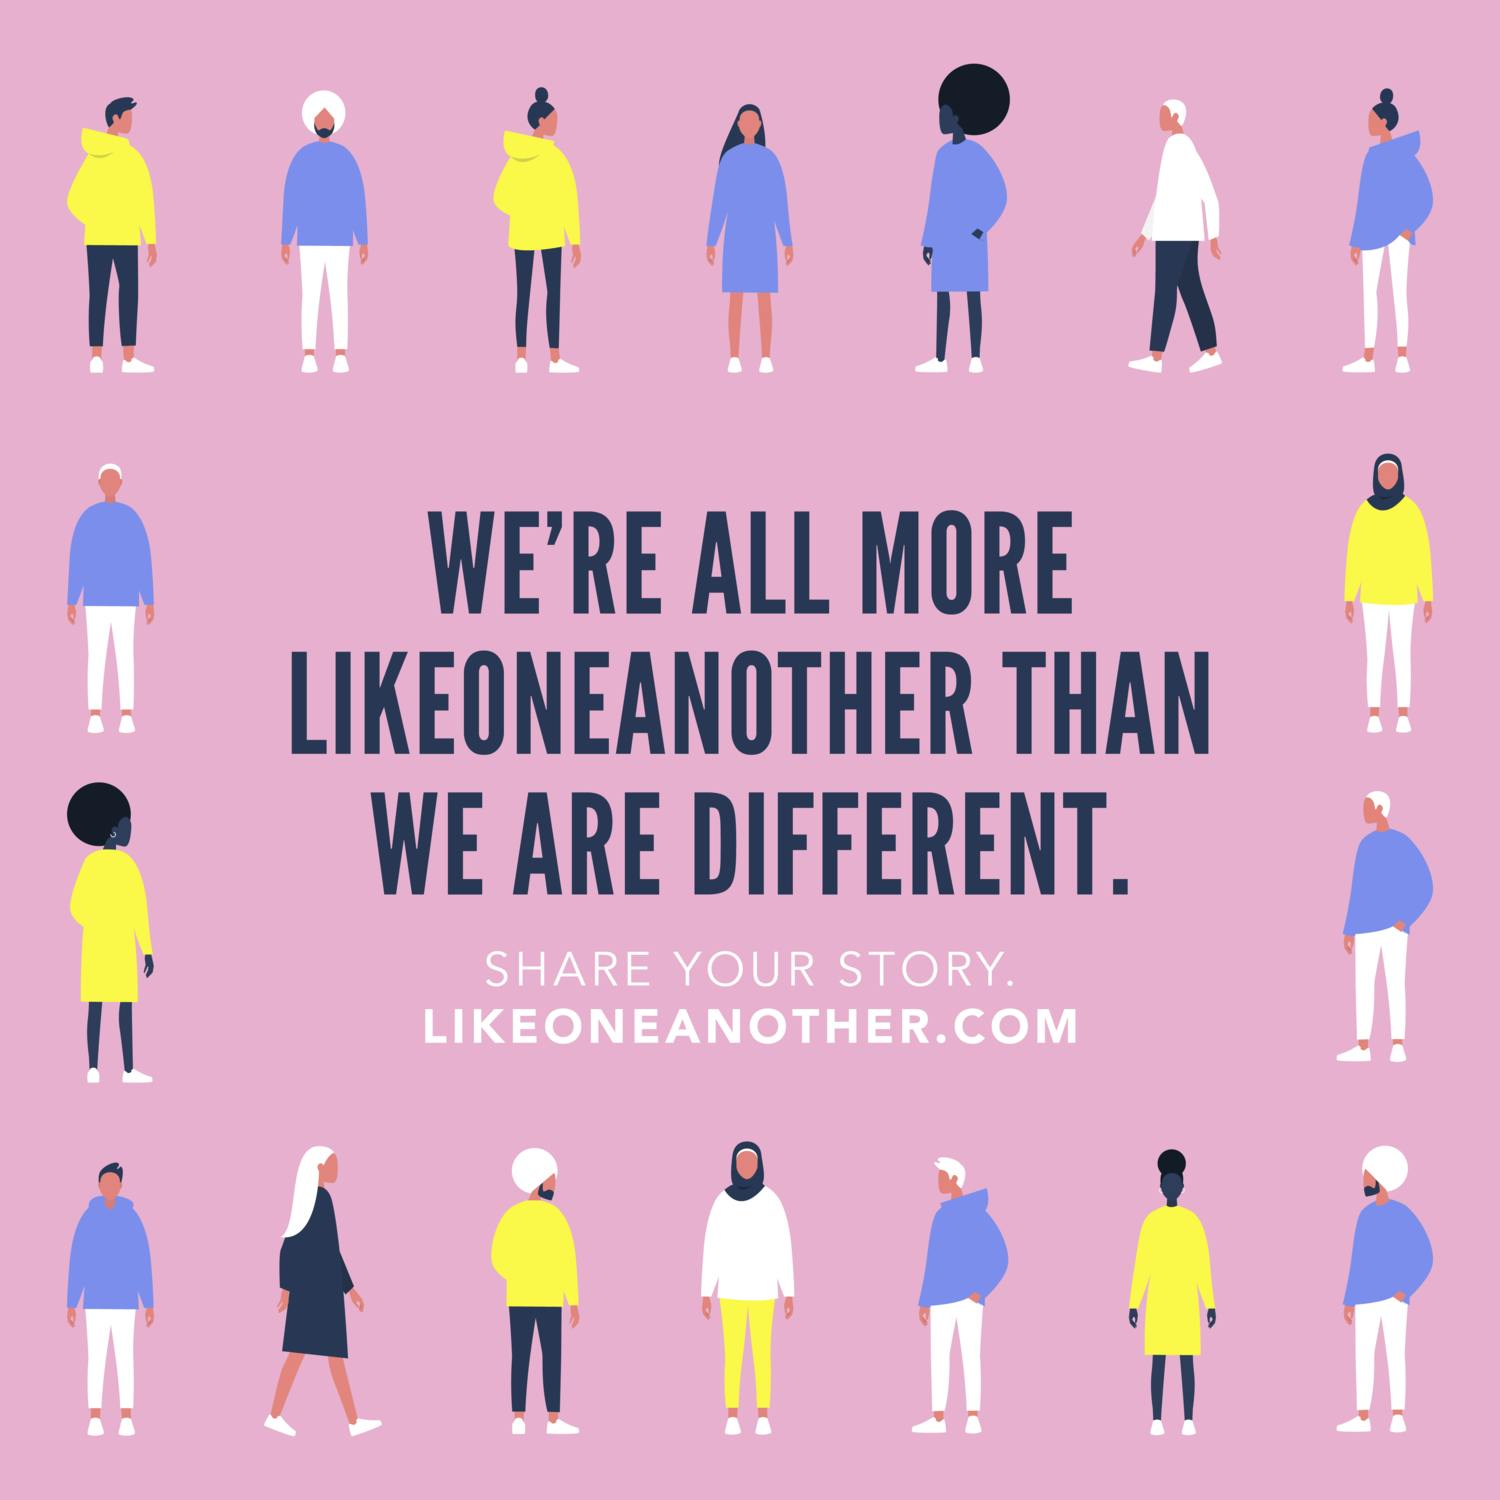 We're all more likeoneanother than we are different.